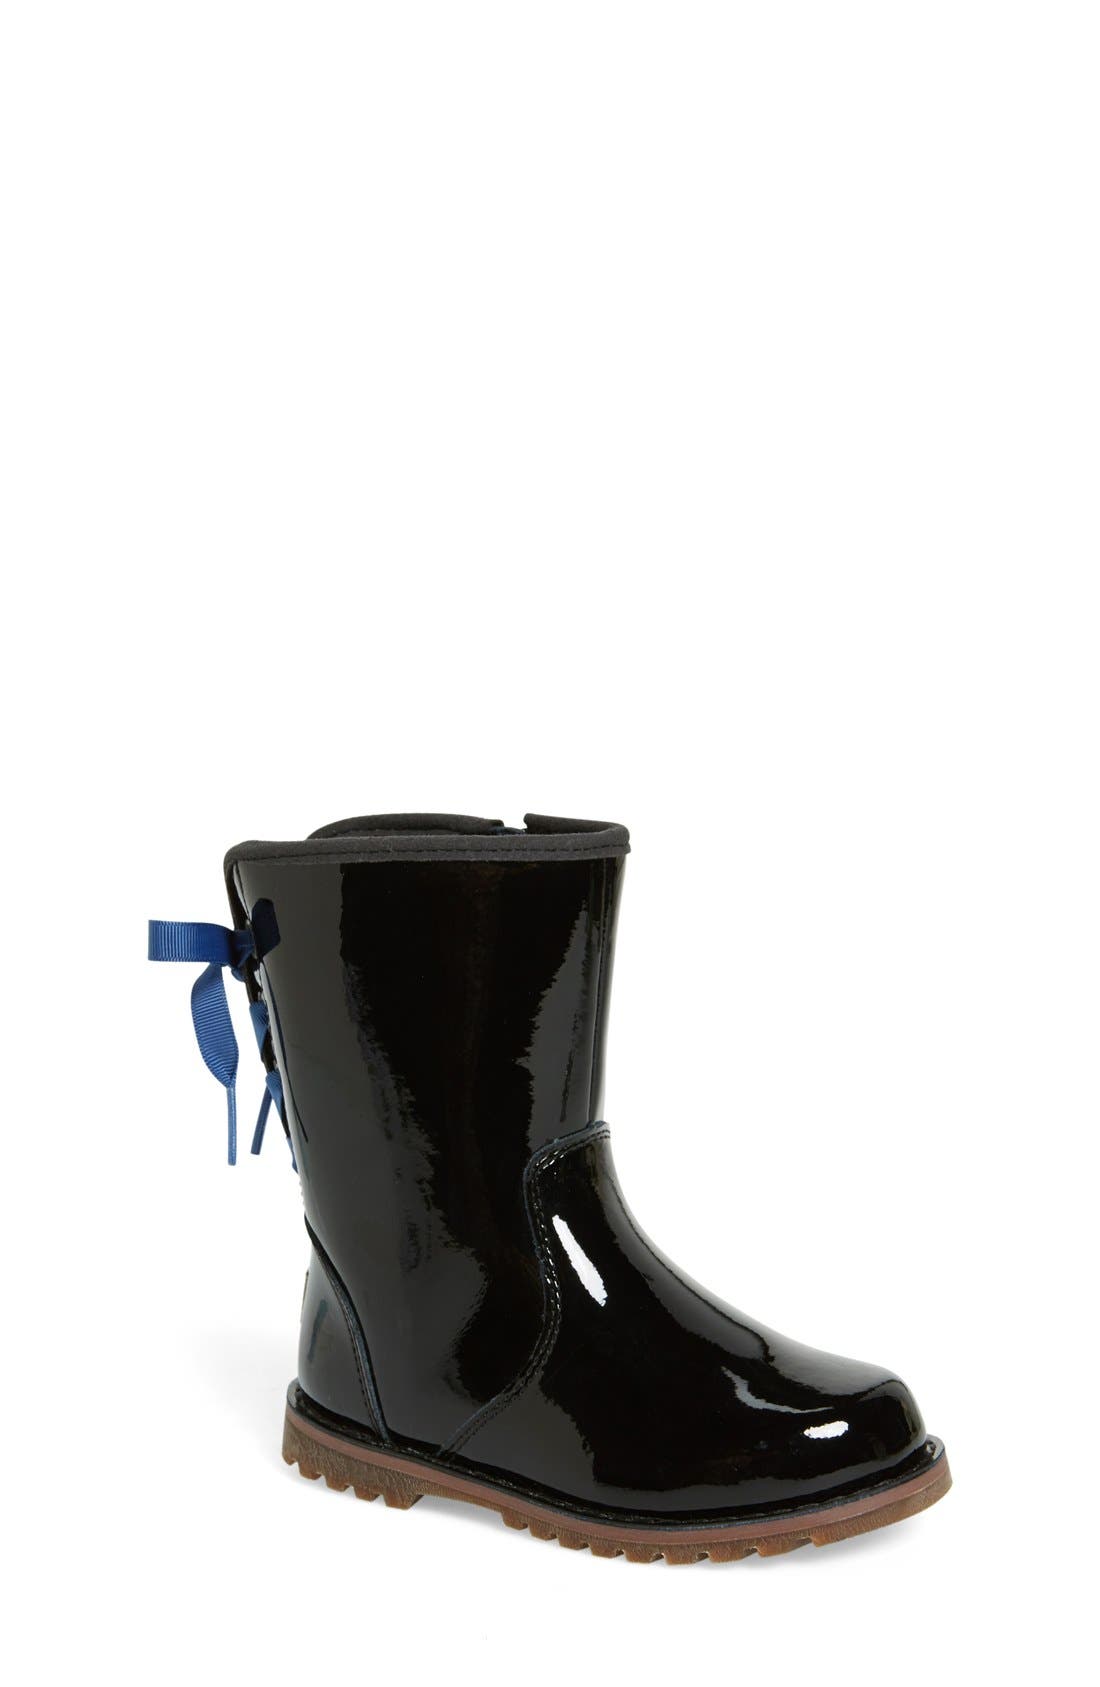 patent leather boots for toddlers